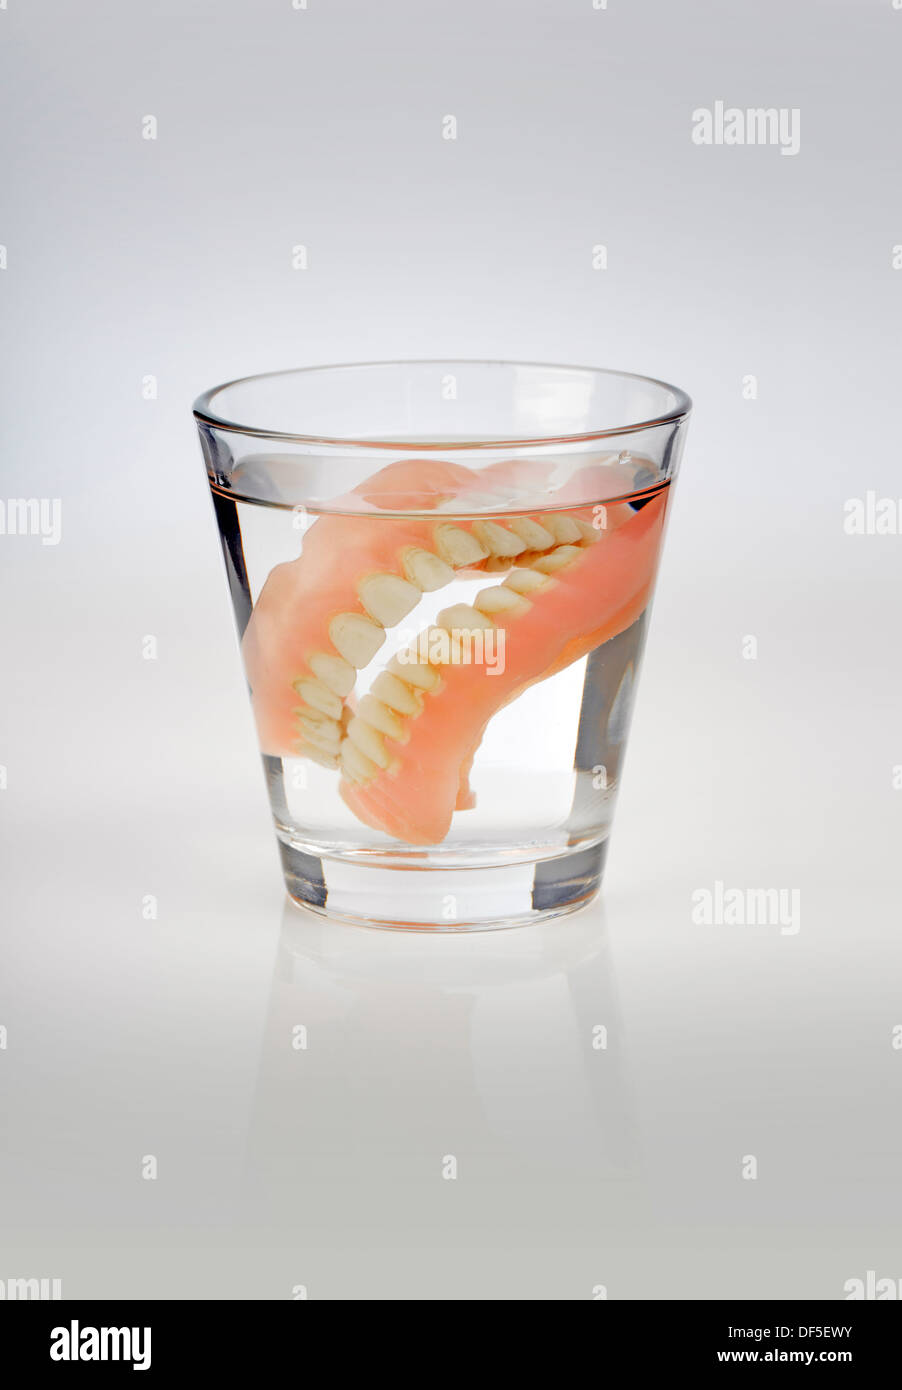 Old dentures in a glass of water Stock Photo - Alamy